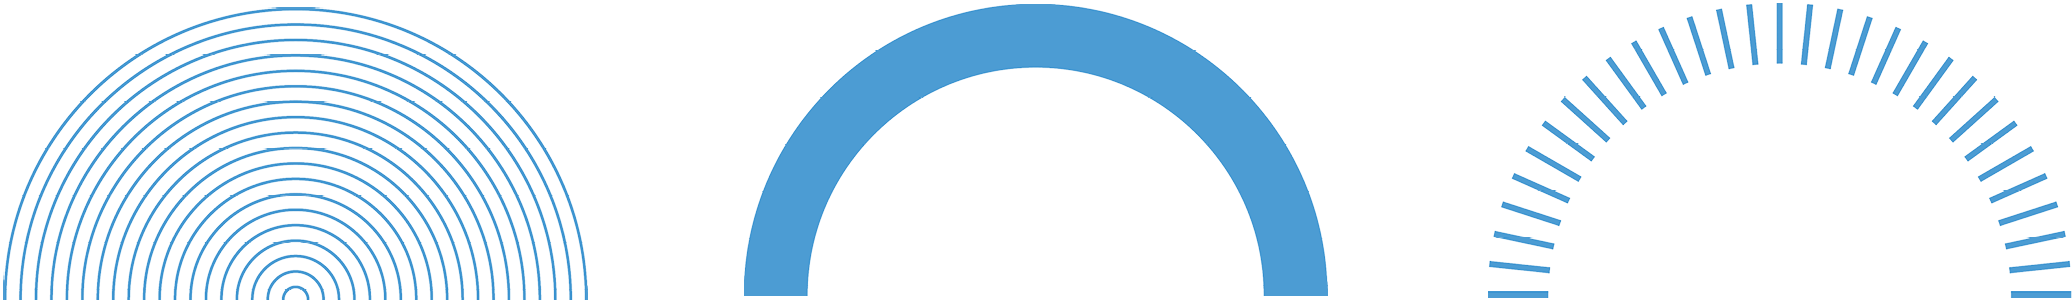 Three shapes. The first is a semicircle made up of concentric thin Carolina Blue lines. The second is an arc in a thick Carolina Blue line. The third is an arc comprised of thin small lines.